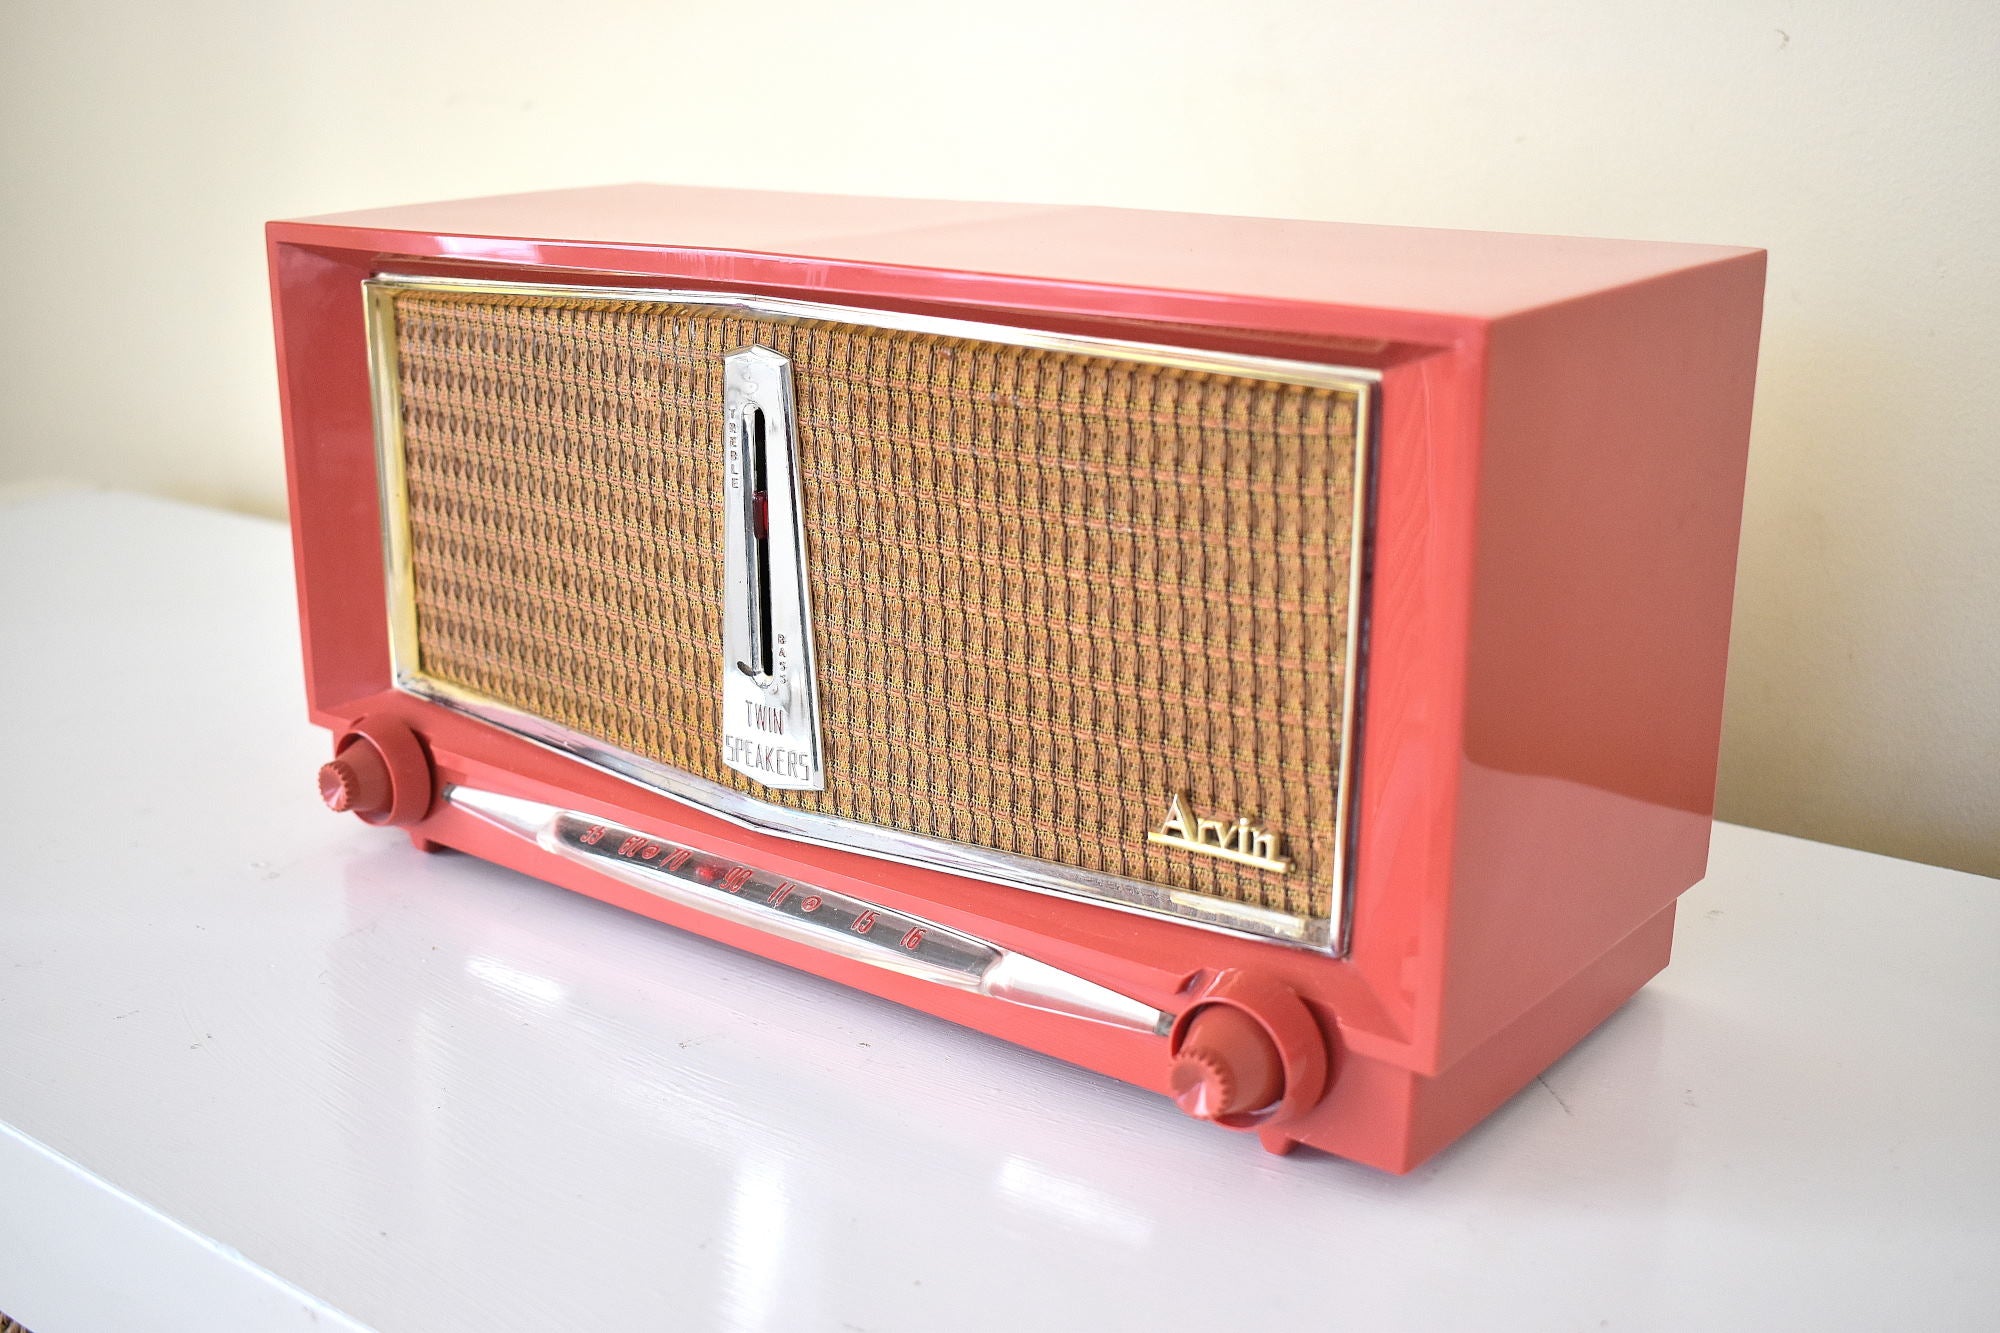 Coral 1956 Arvin Model 956T AM Vacuum Tube Radio Sci Fi Dashboard Excellent Plus Condition! Sounds Wonderful!